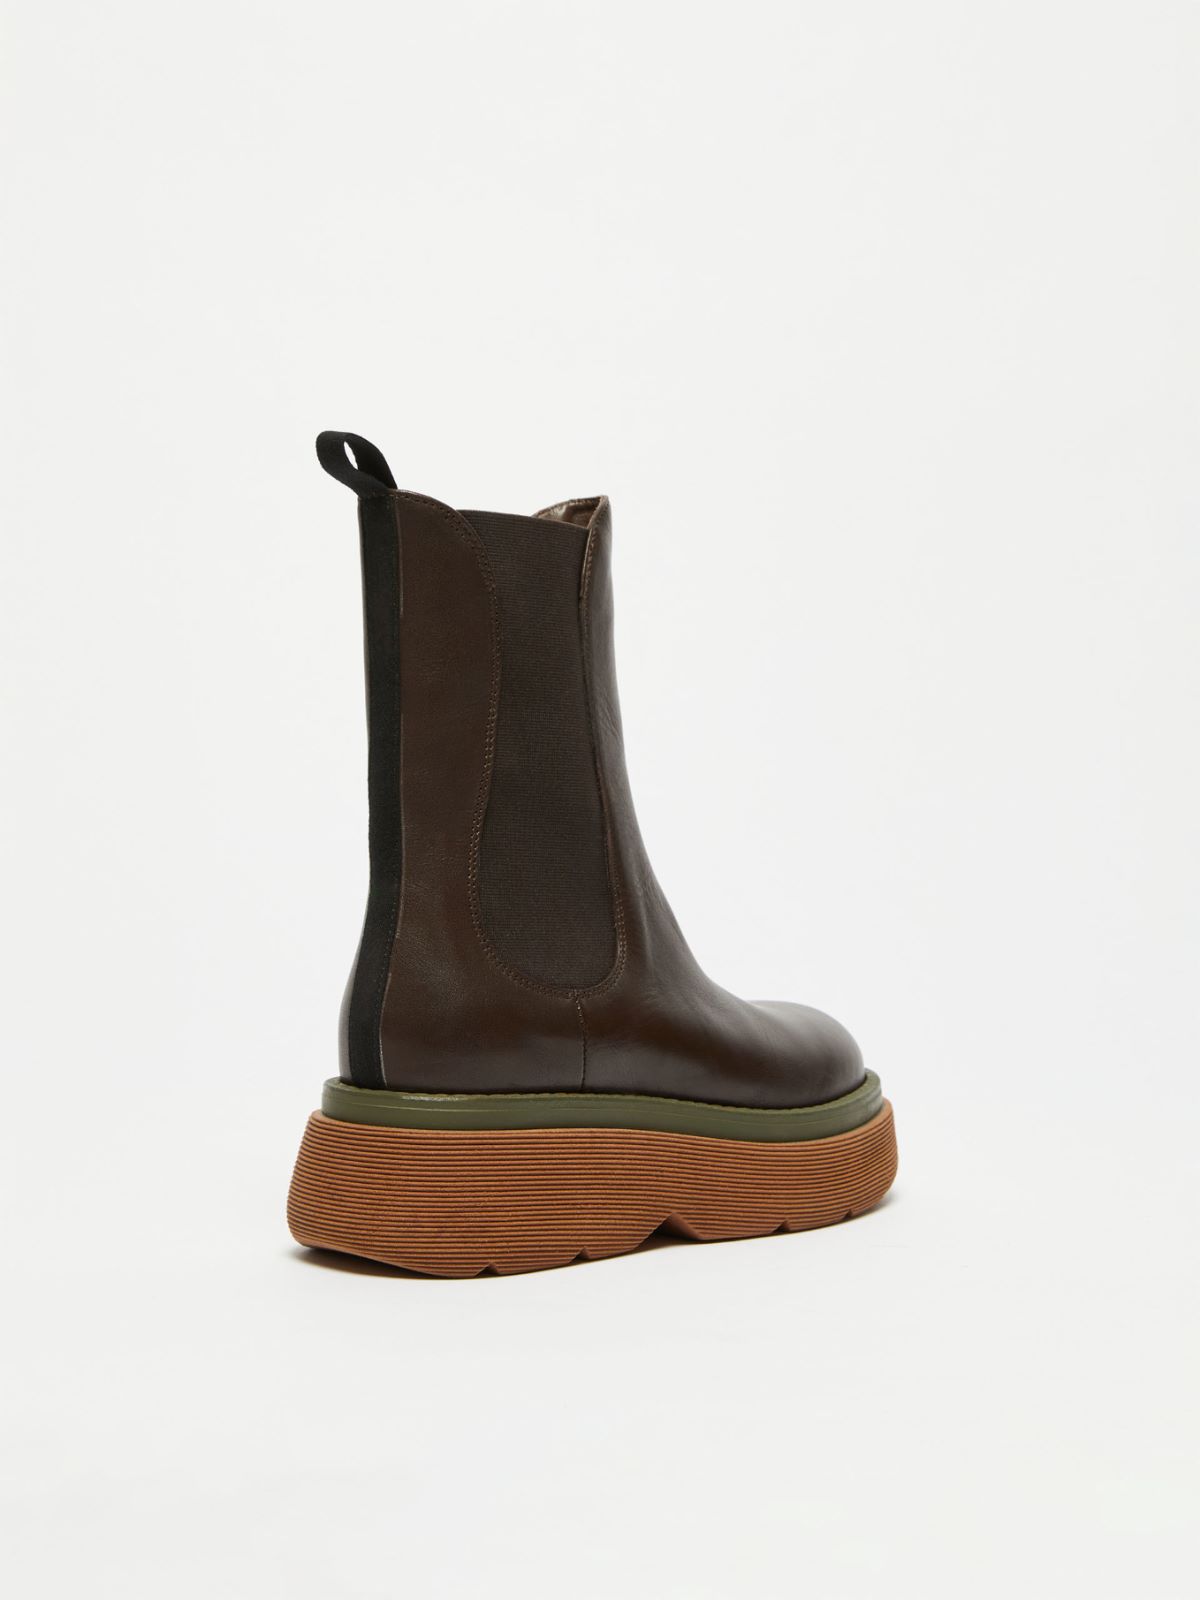 Leather ankle boots - DARK BOWN - Weekend Max Mara - 3